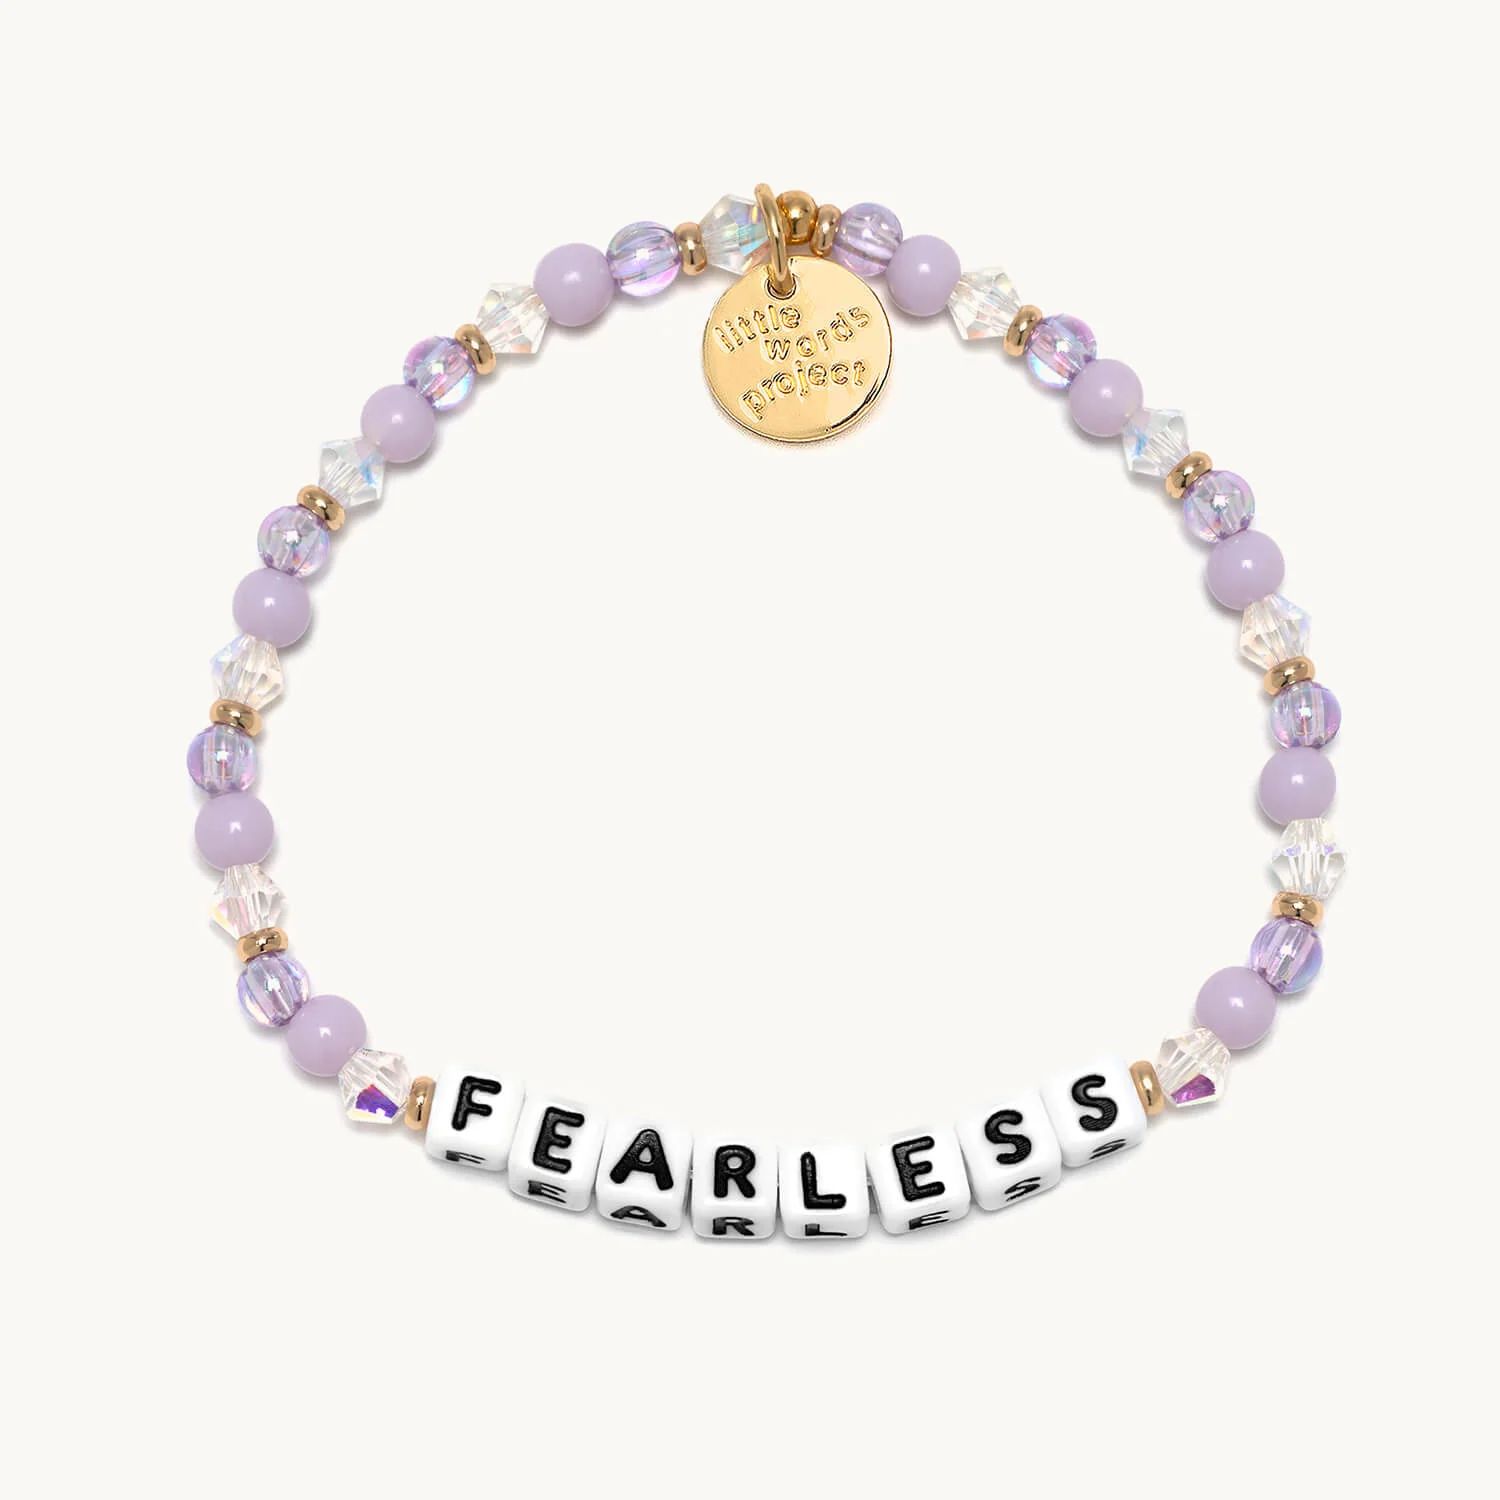 Fearless | Little Words Project